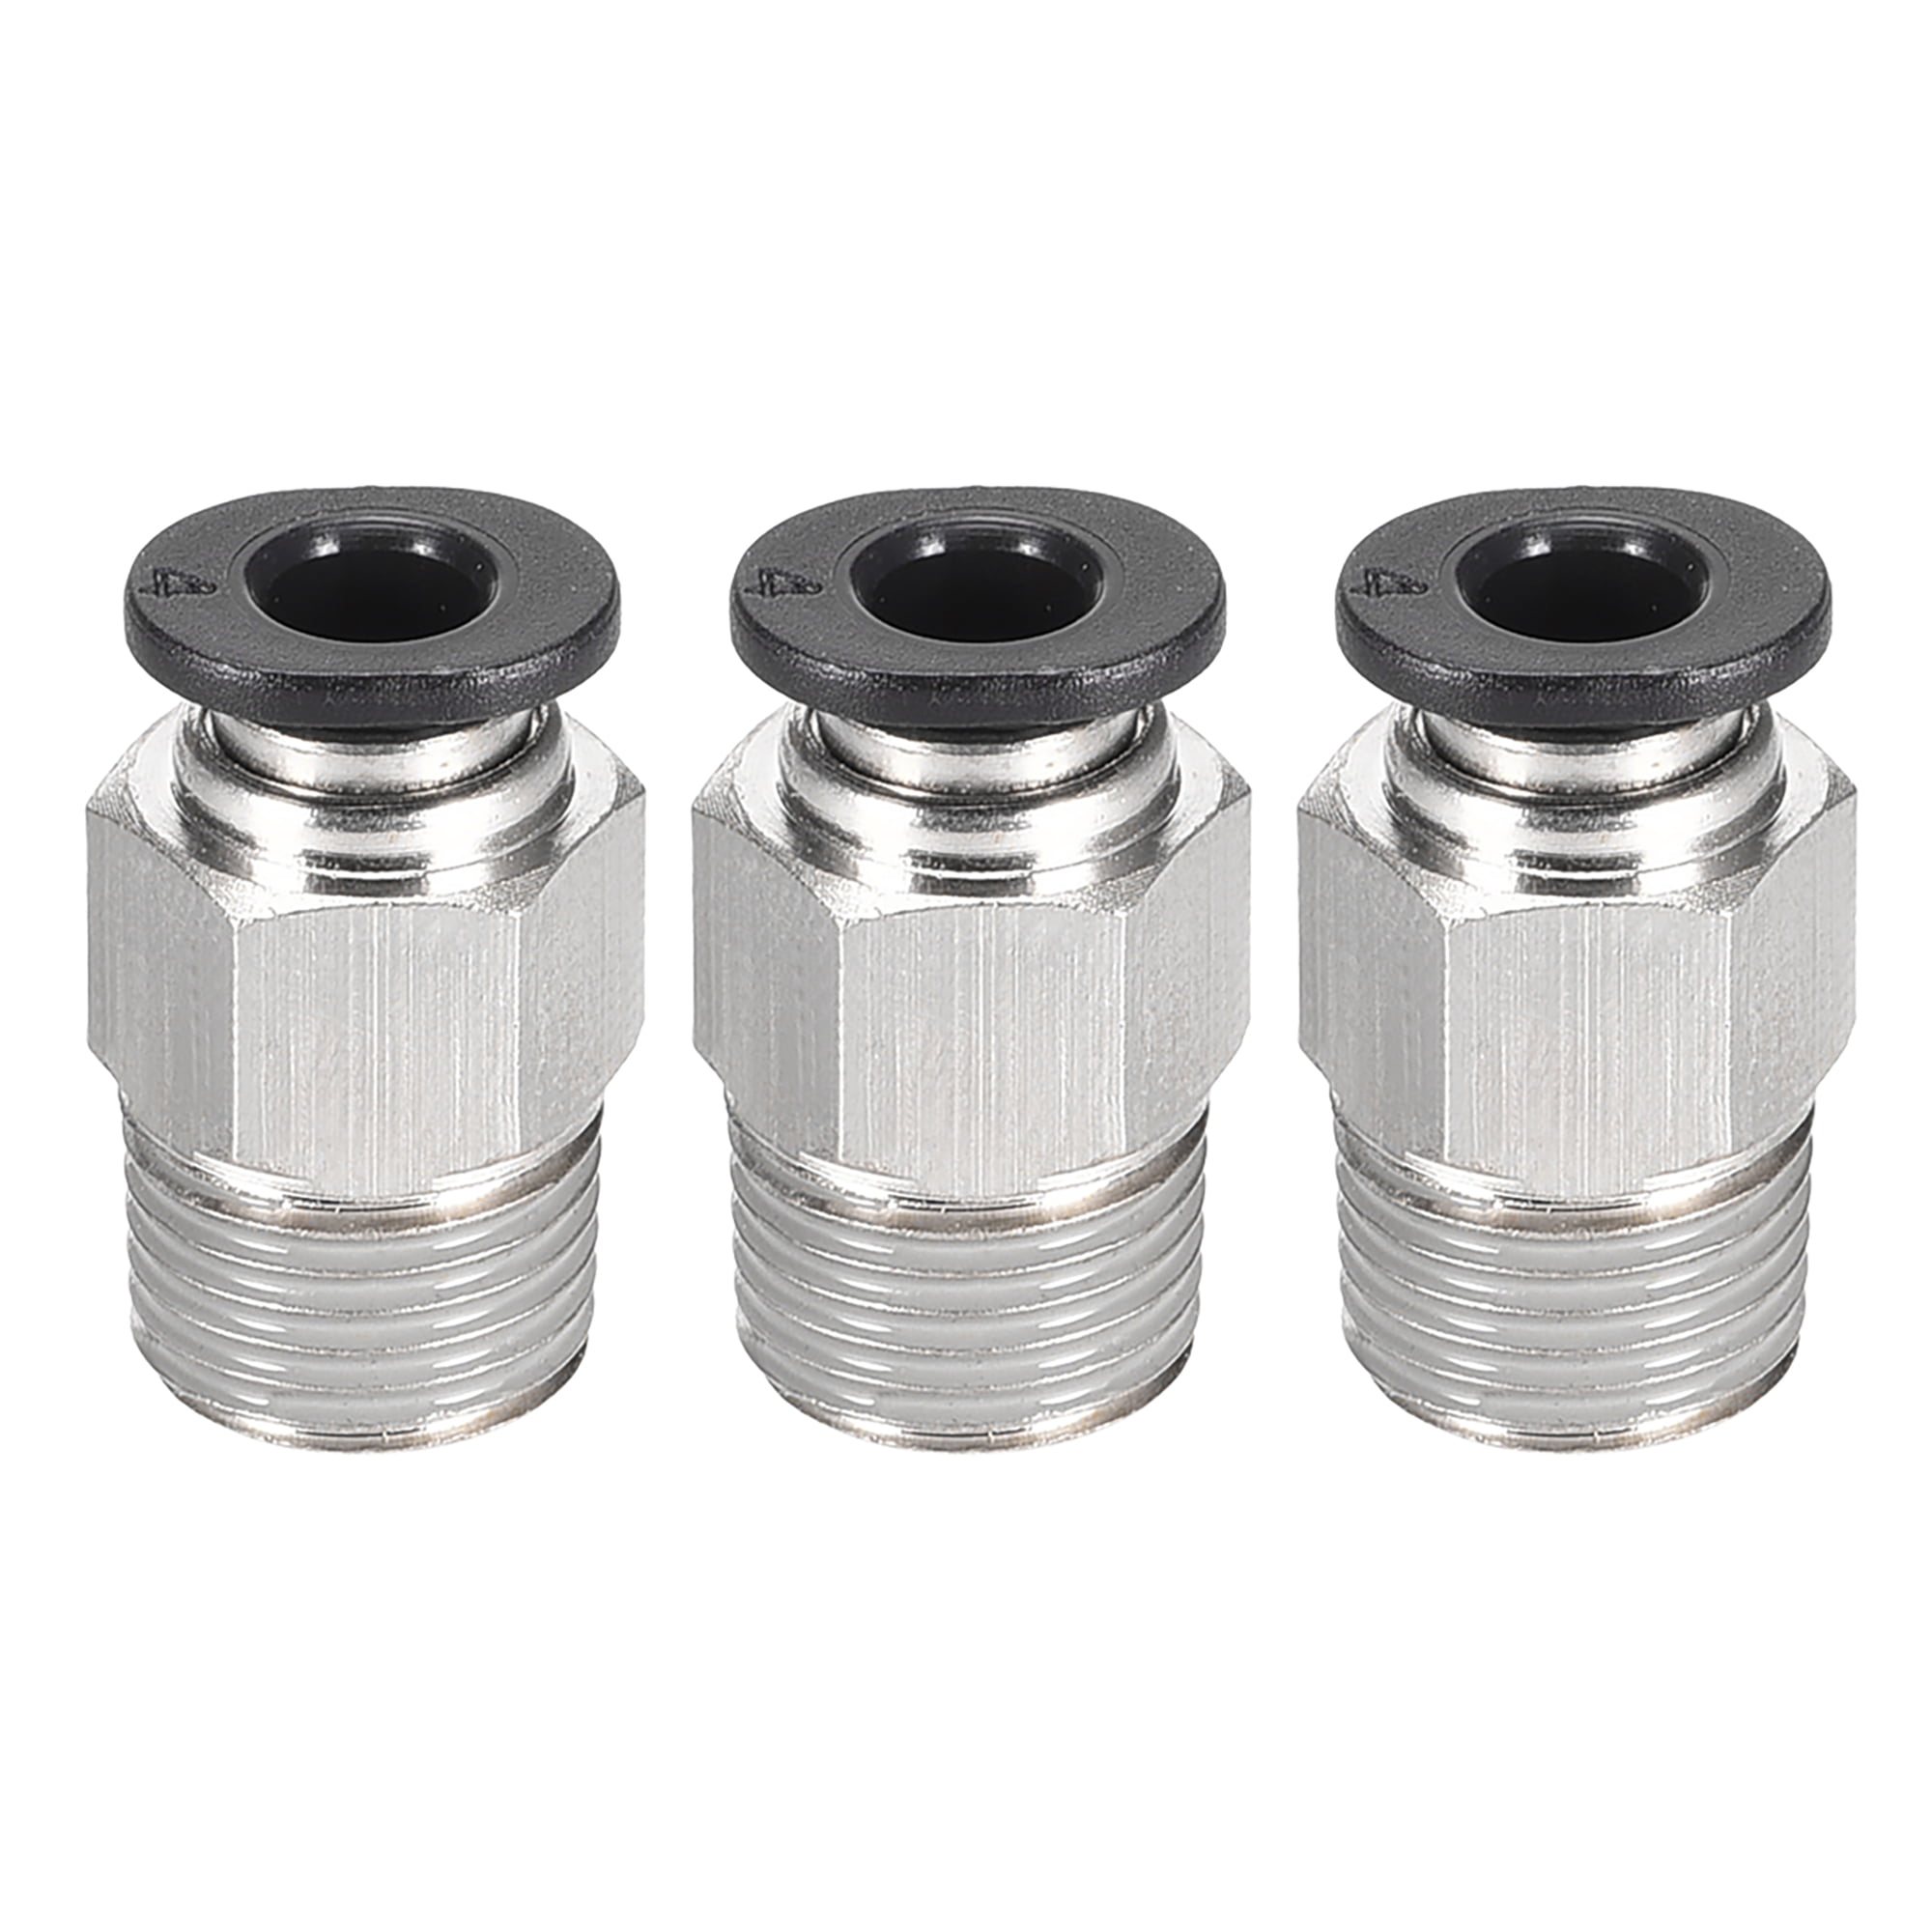 20pcs 1/8" PT Male Thread 4mm Push In Joint Pneumatic Connector Quick Fittings 